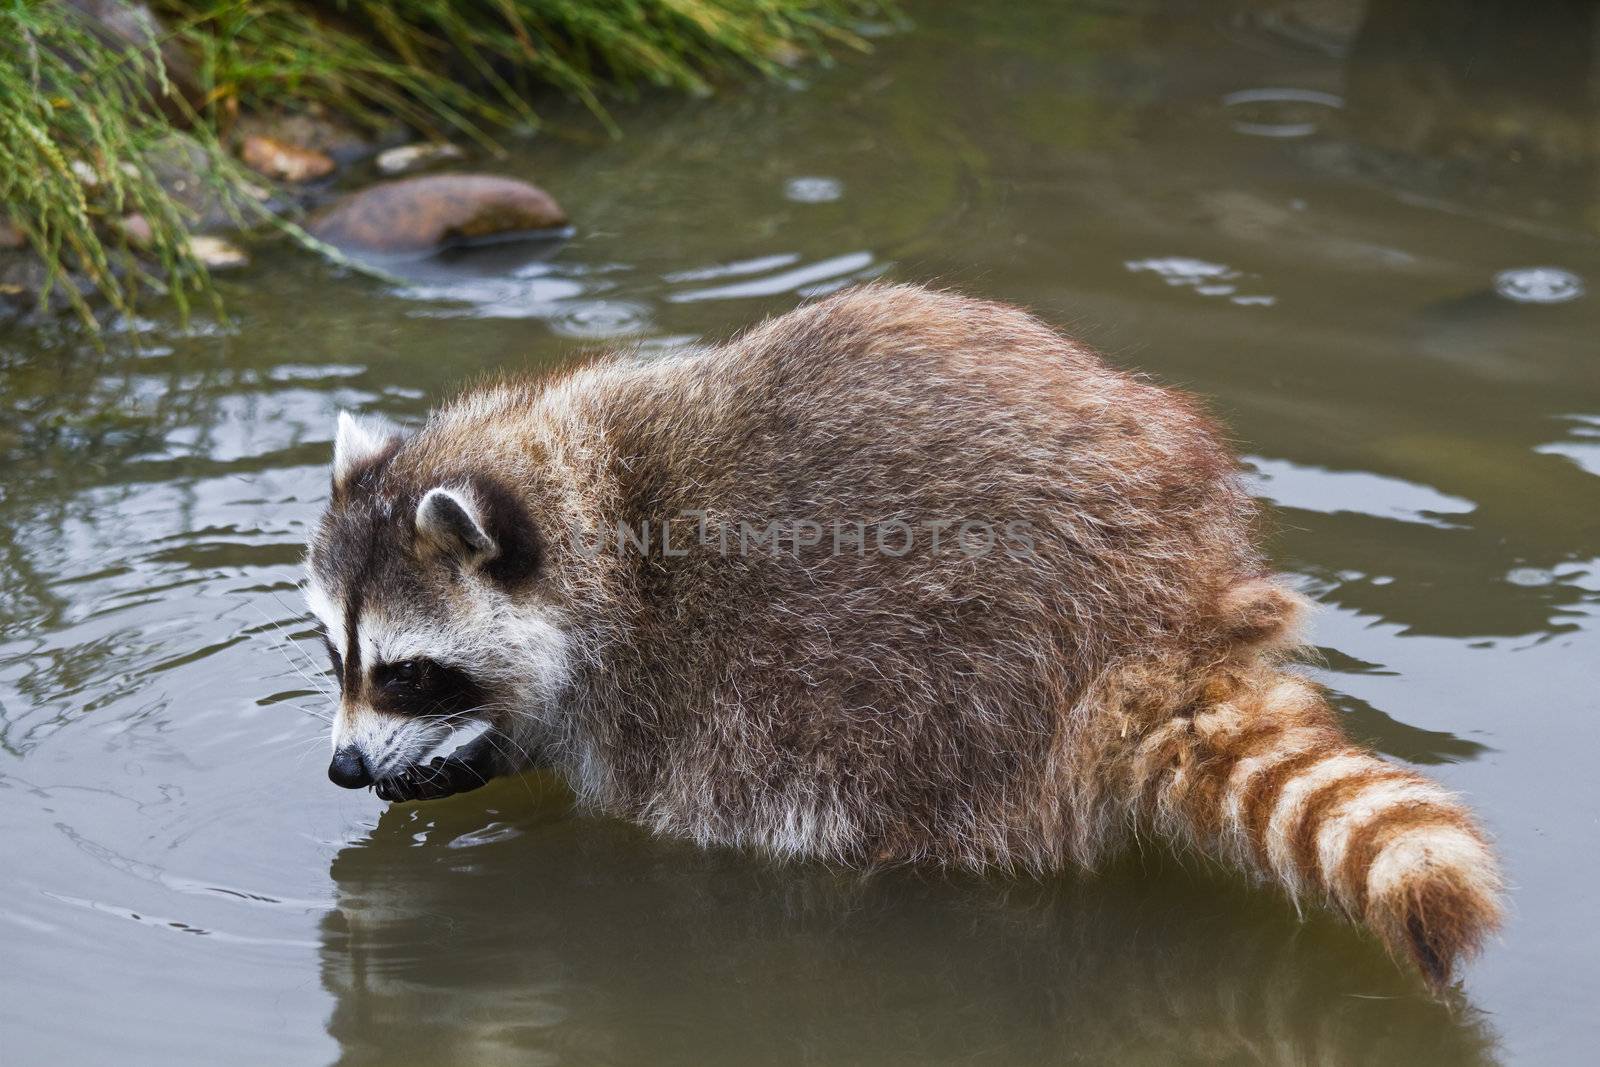 Common raccoon or Procyon lotor by Colette